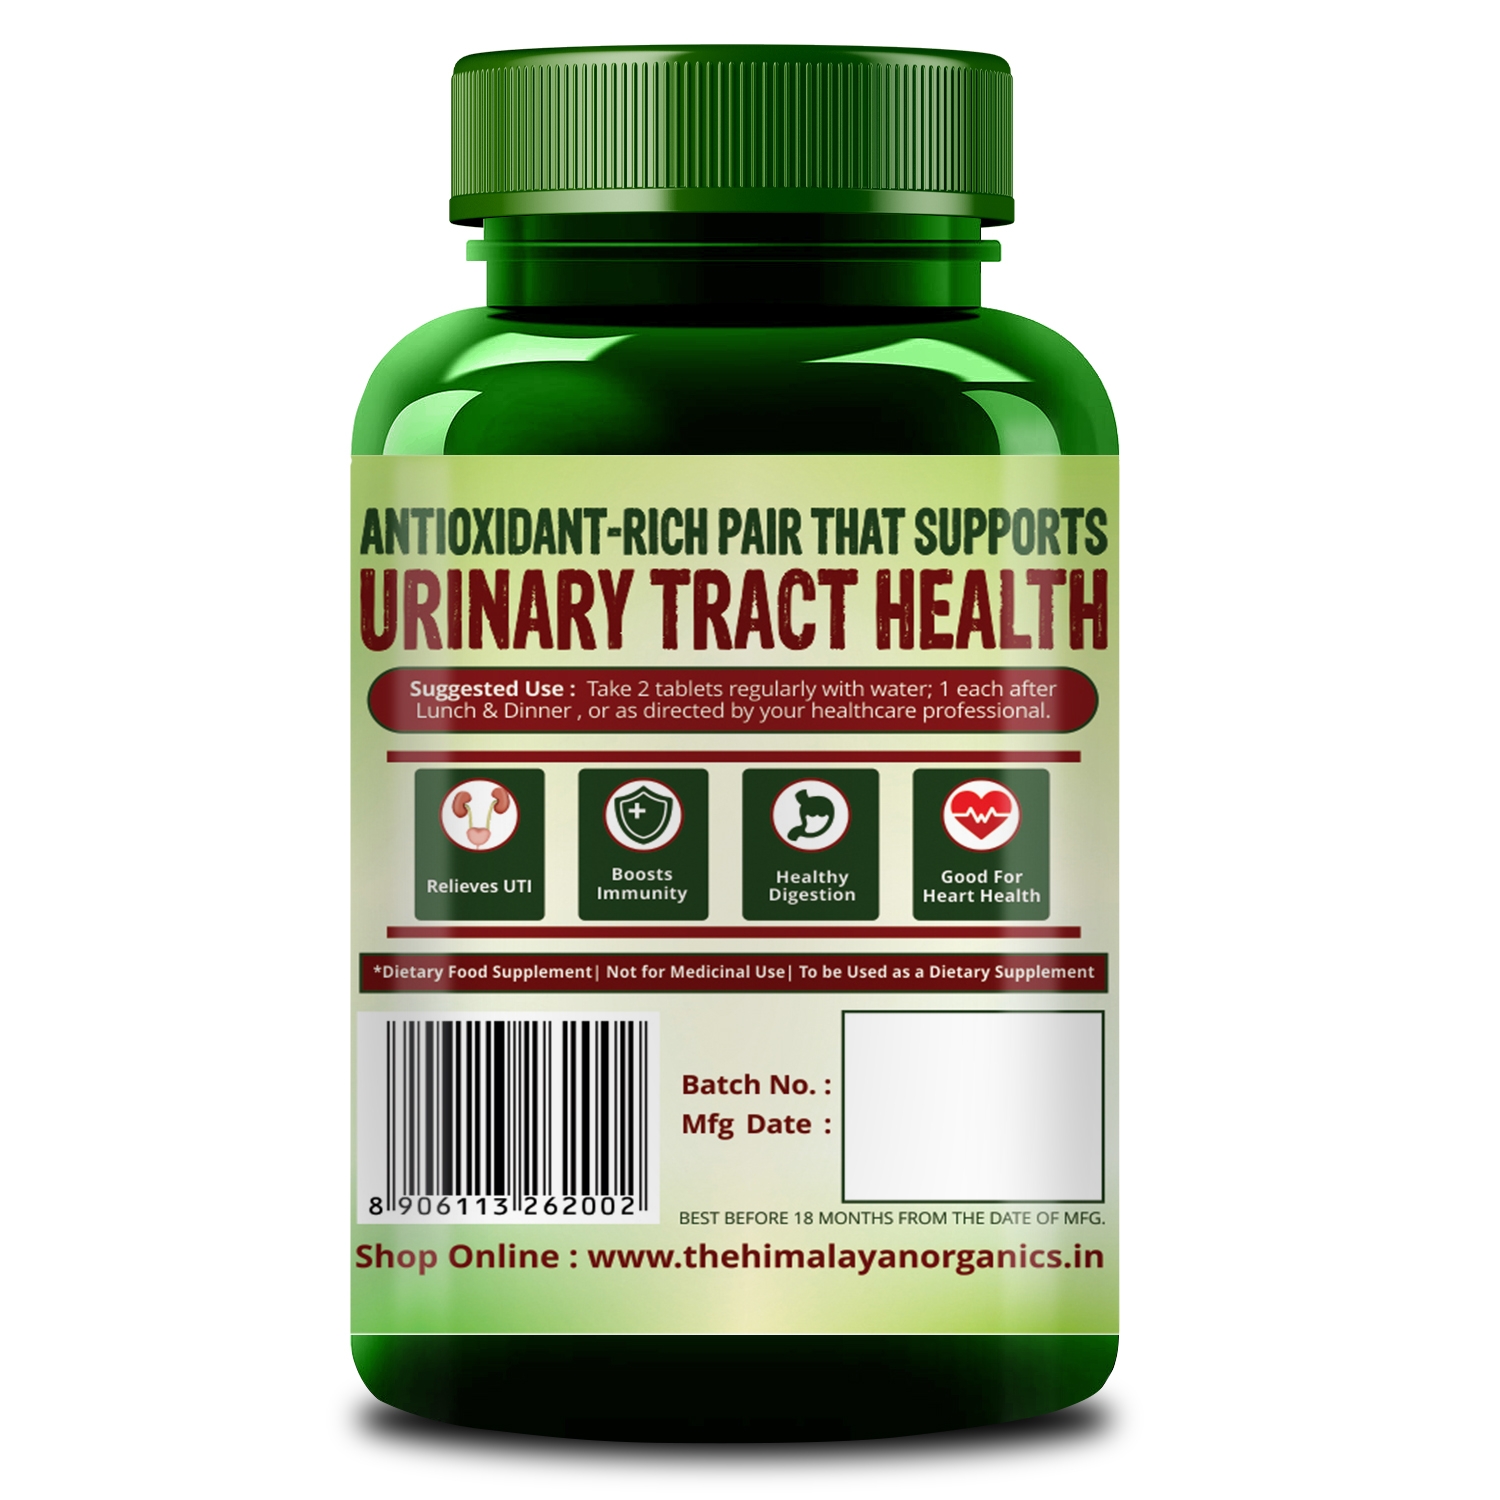 Himalayan Organics D-Mannose + Cranberry Antioxidant Rich Supplement for Kidney Health & Urinary Tract Infection - 90 Tablets